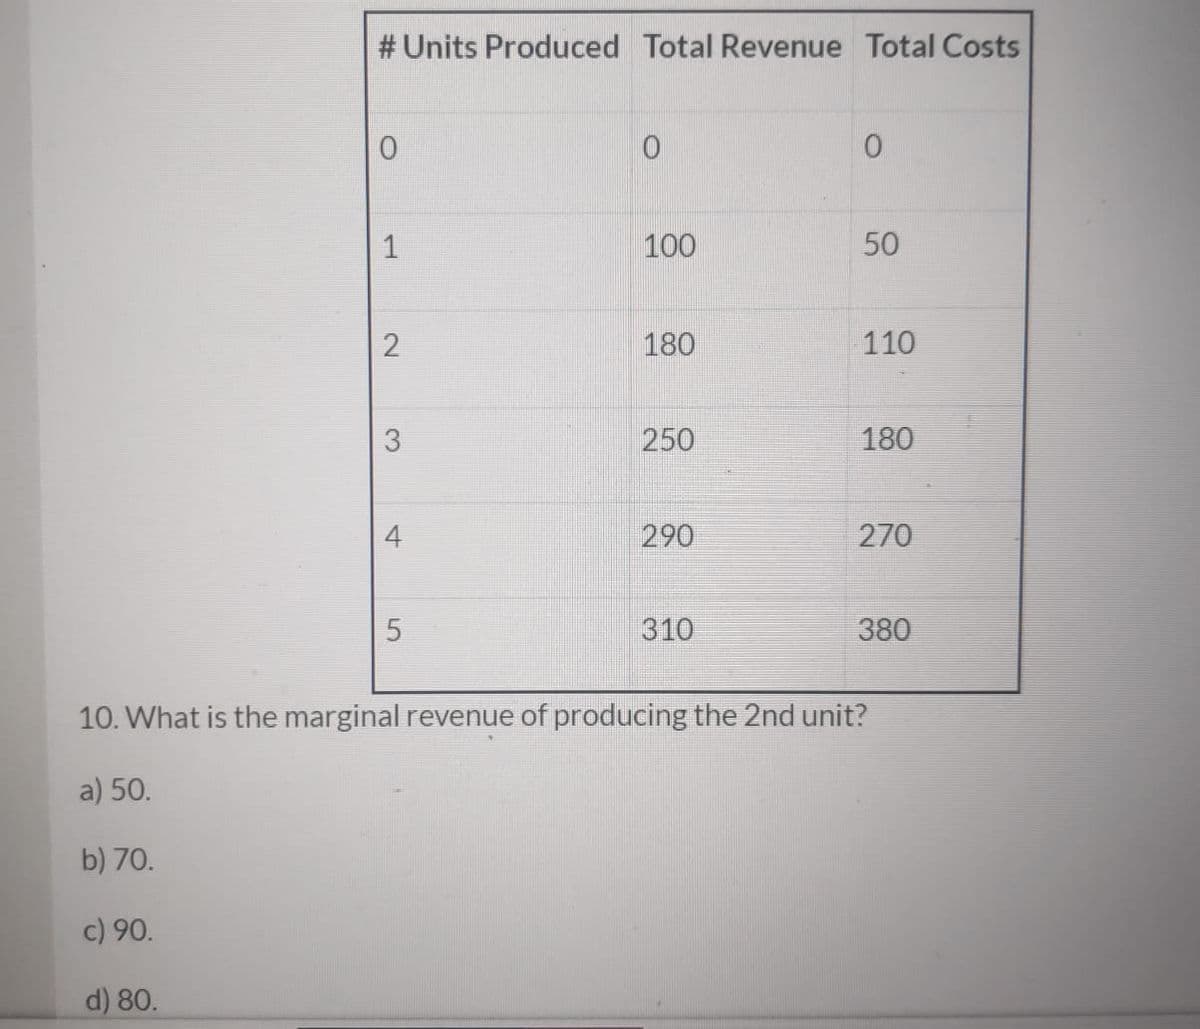 # Units Produced Total Revenue Total Costs
1
100
50
180
110
250
180
4
290
270
310
380
10. What is the marginal revenue of producing the 2nd unit?
a) 50.
b) 70.
c) 90.
d) 80.
2.
5.
